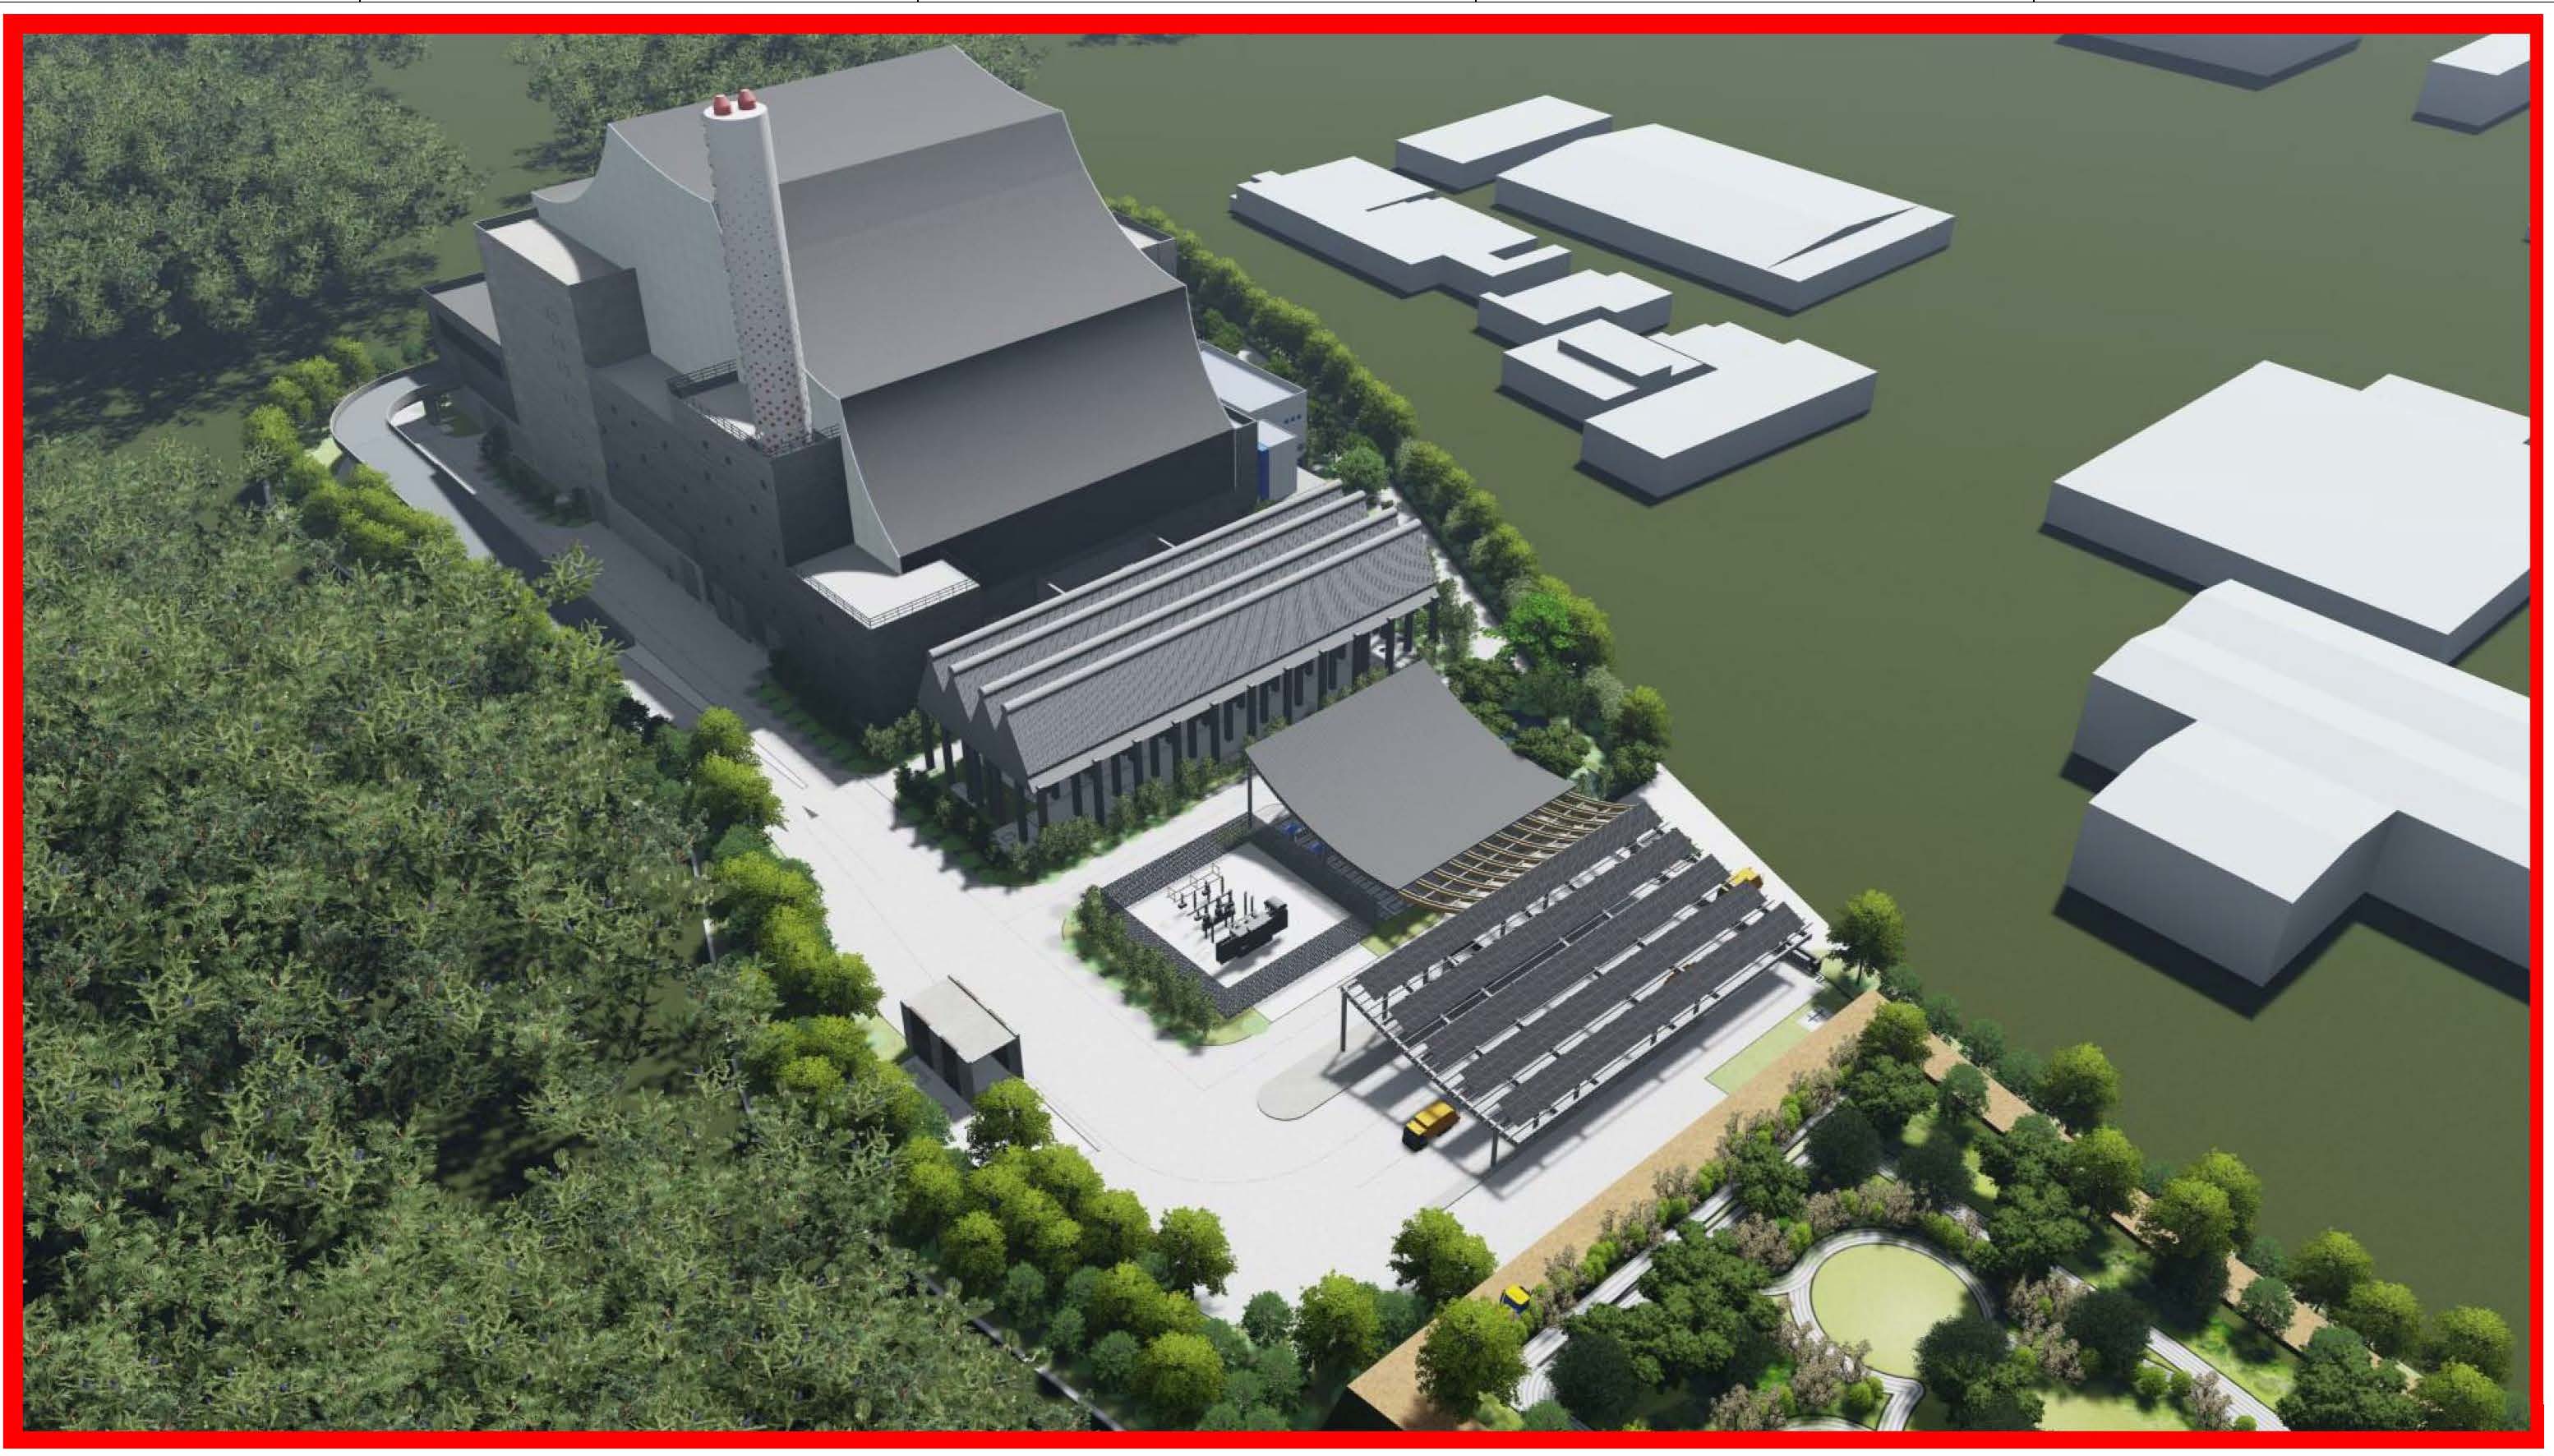 Foundation Piles, Foundation and Structural Engineering of Taoyuan City Biomass Energy Center